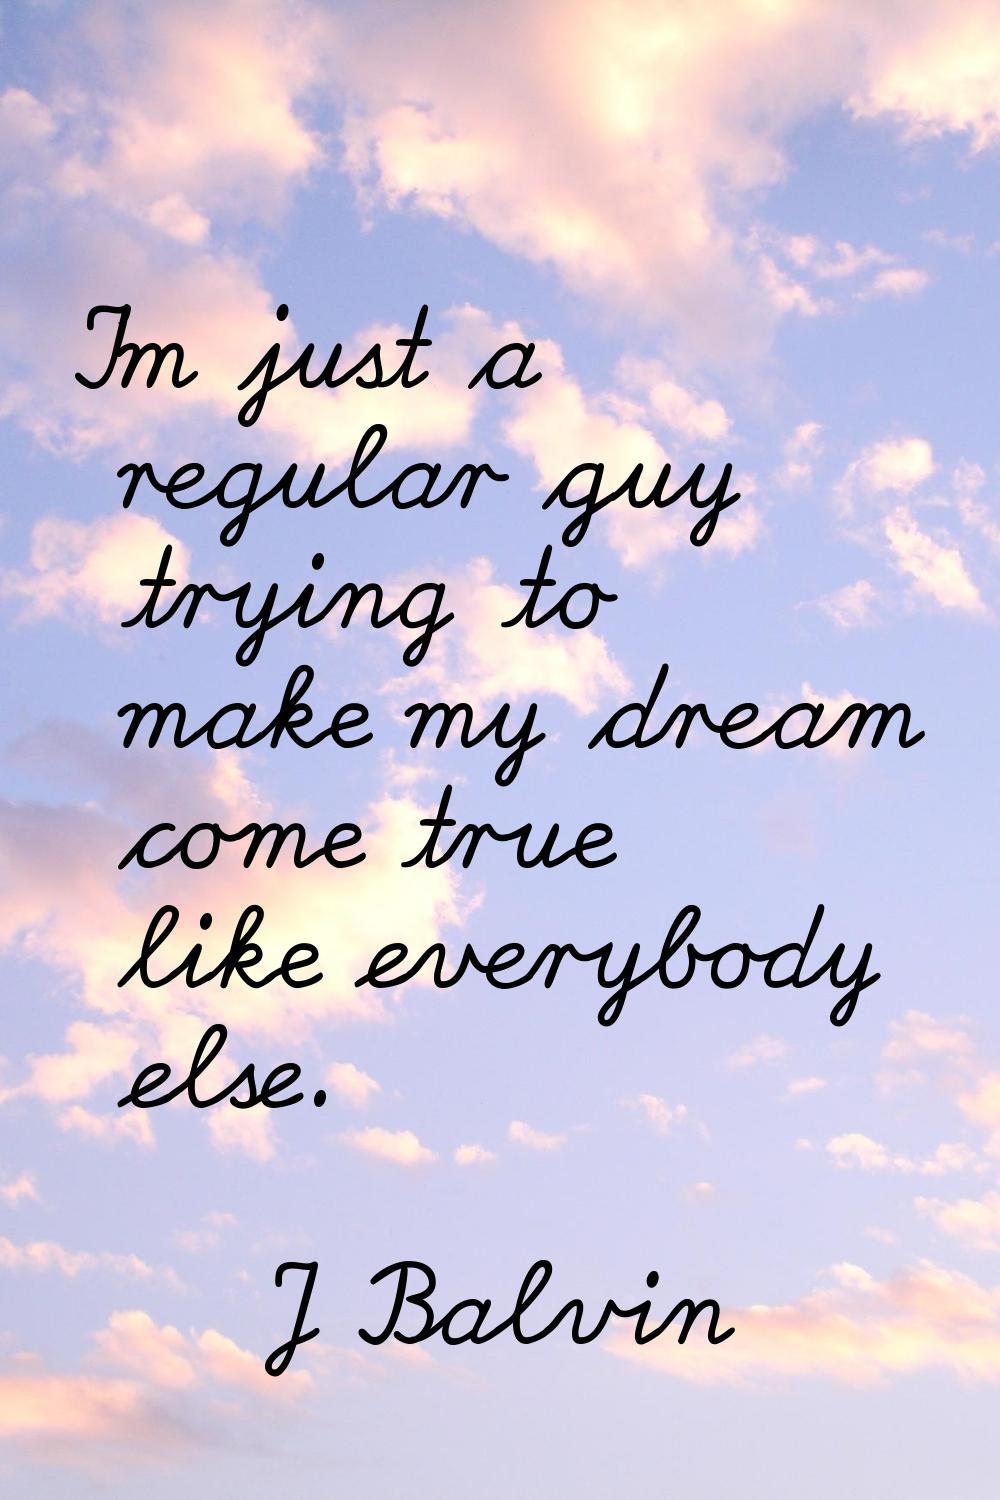 I'm just a regular guy trying to make my dream come true like everybody else.